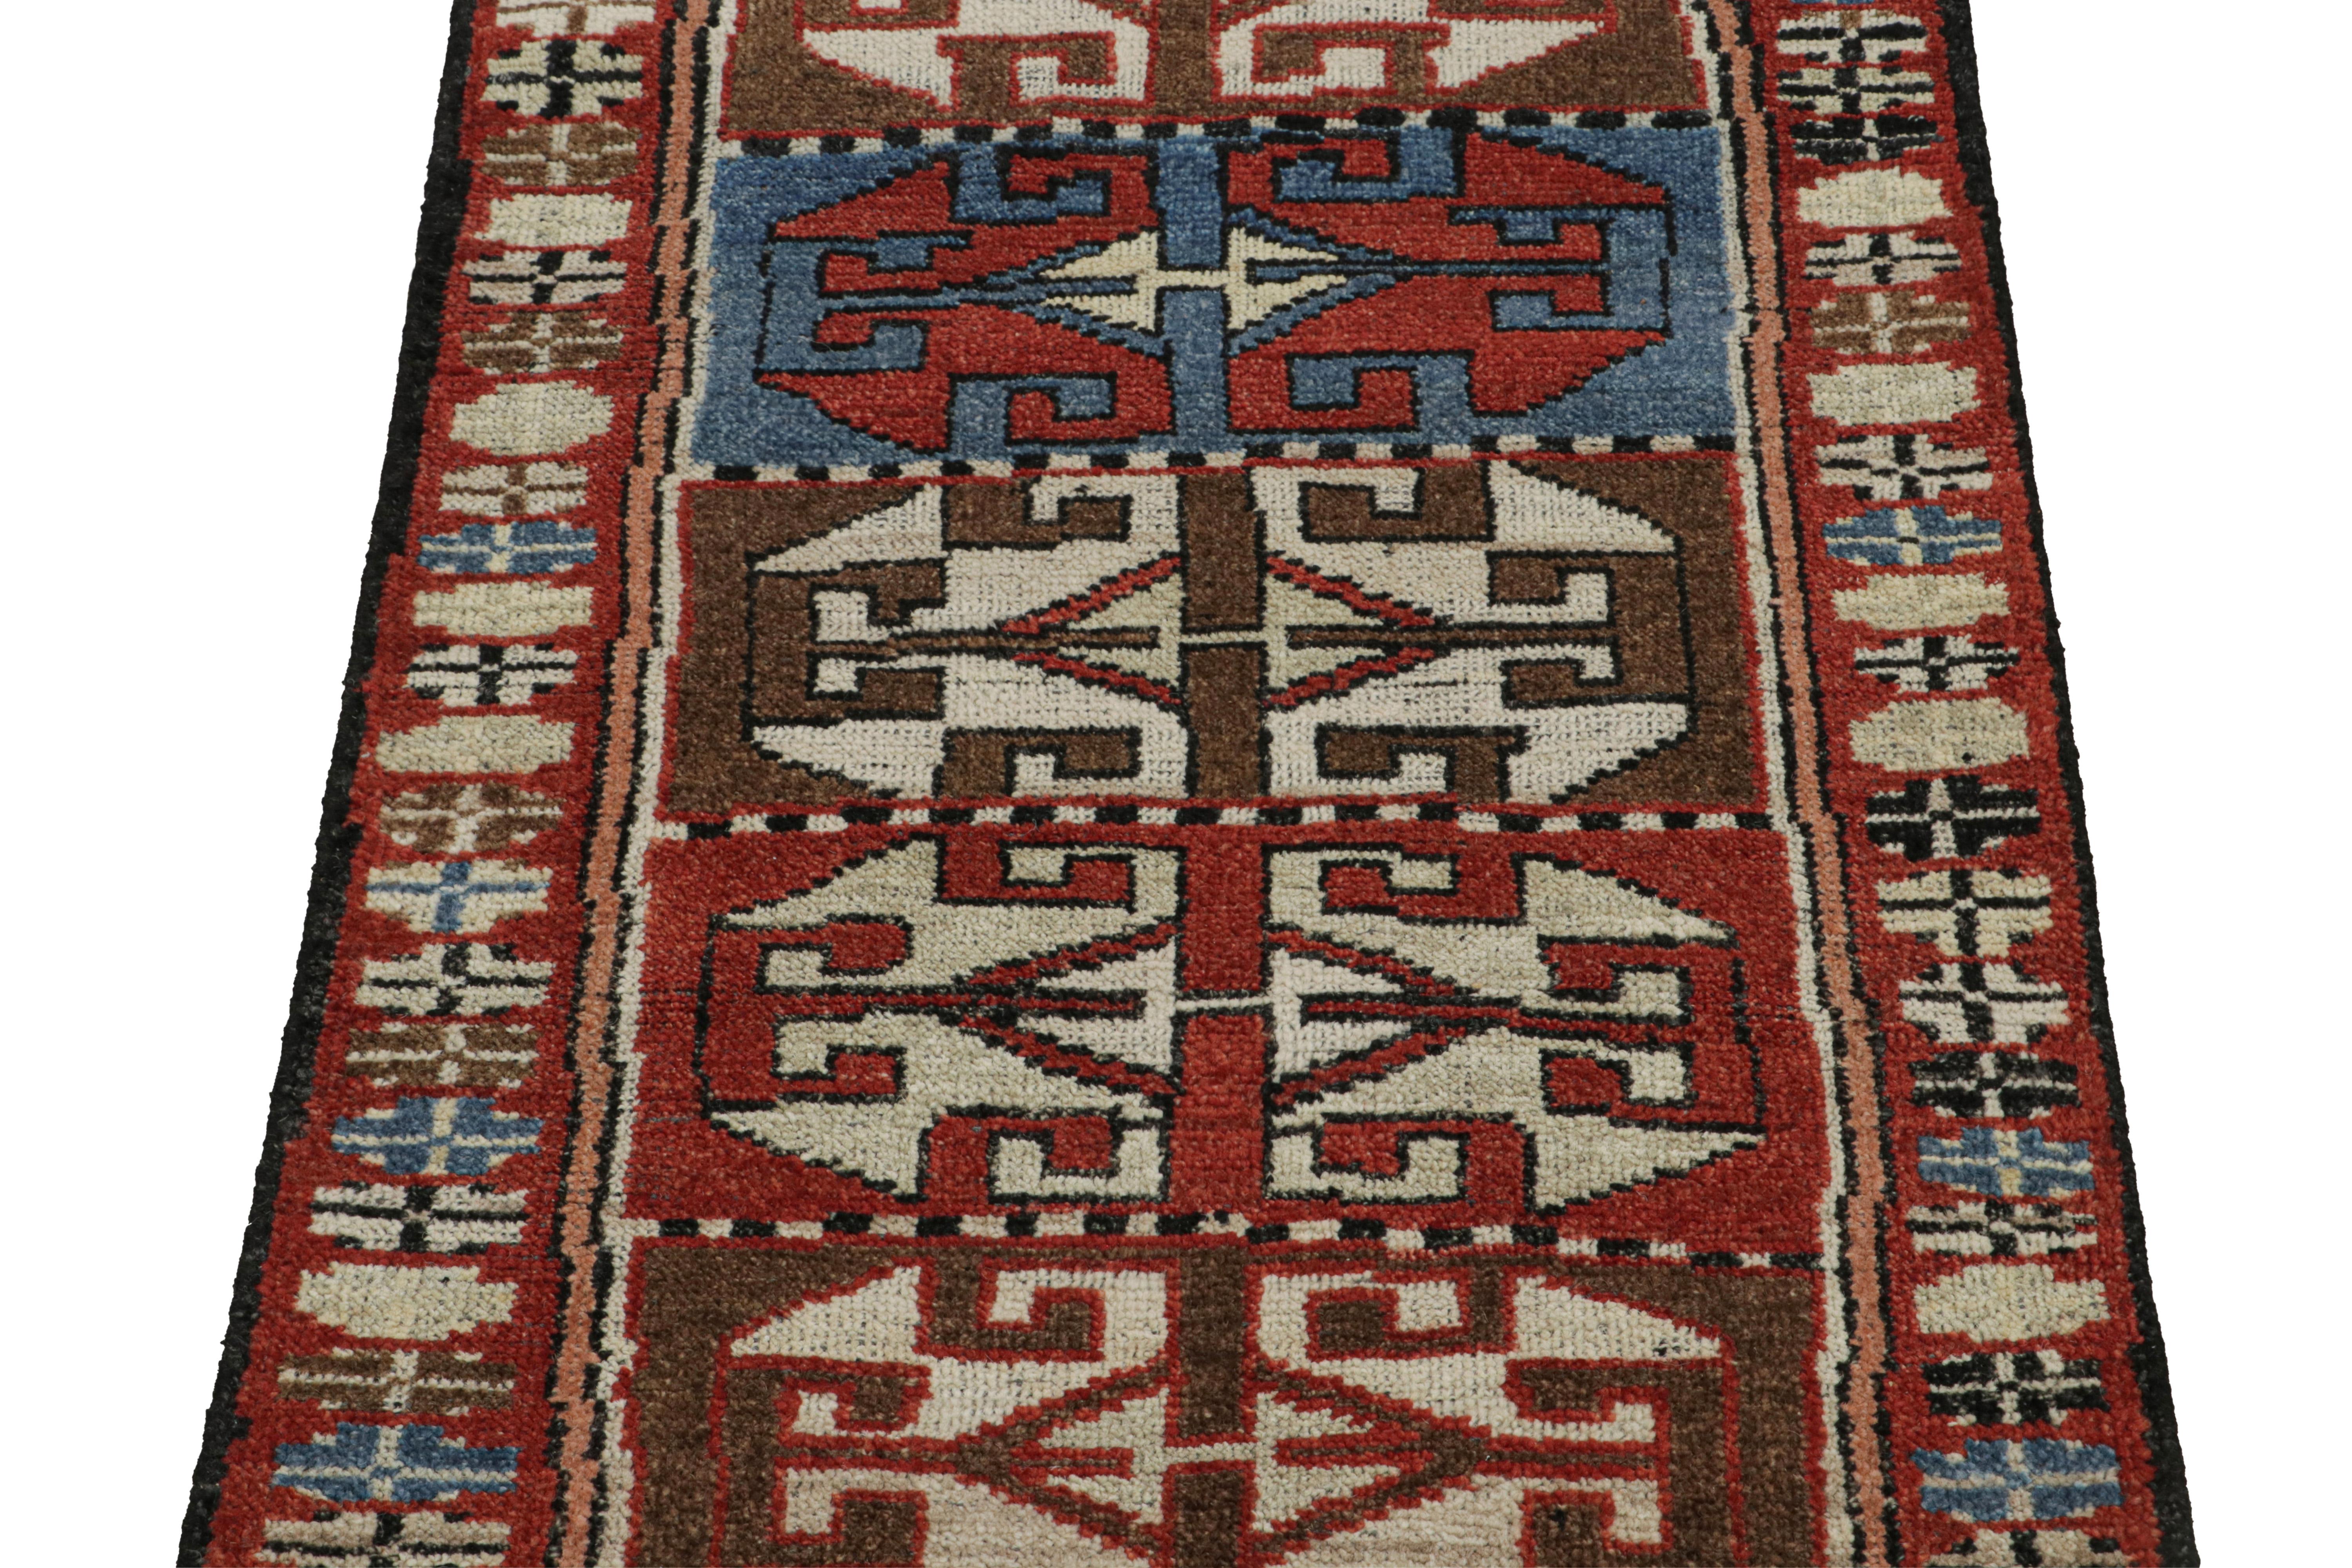 Rug & Kilim’s Antique Tribal Style Rug in Red, Blue & Brown Patterns In New Condition For Sale In Long Island City, NY